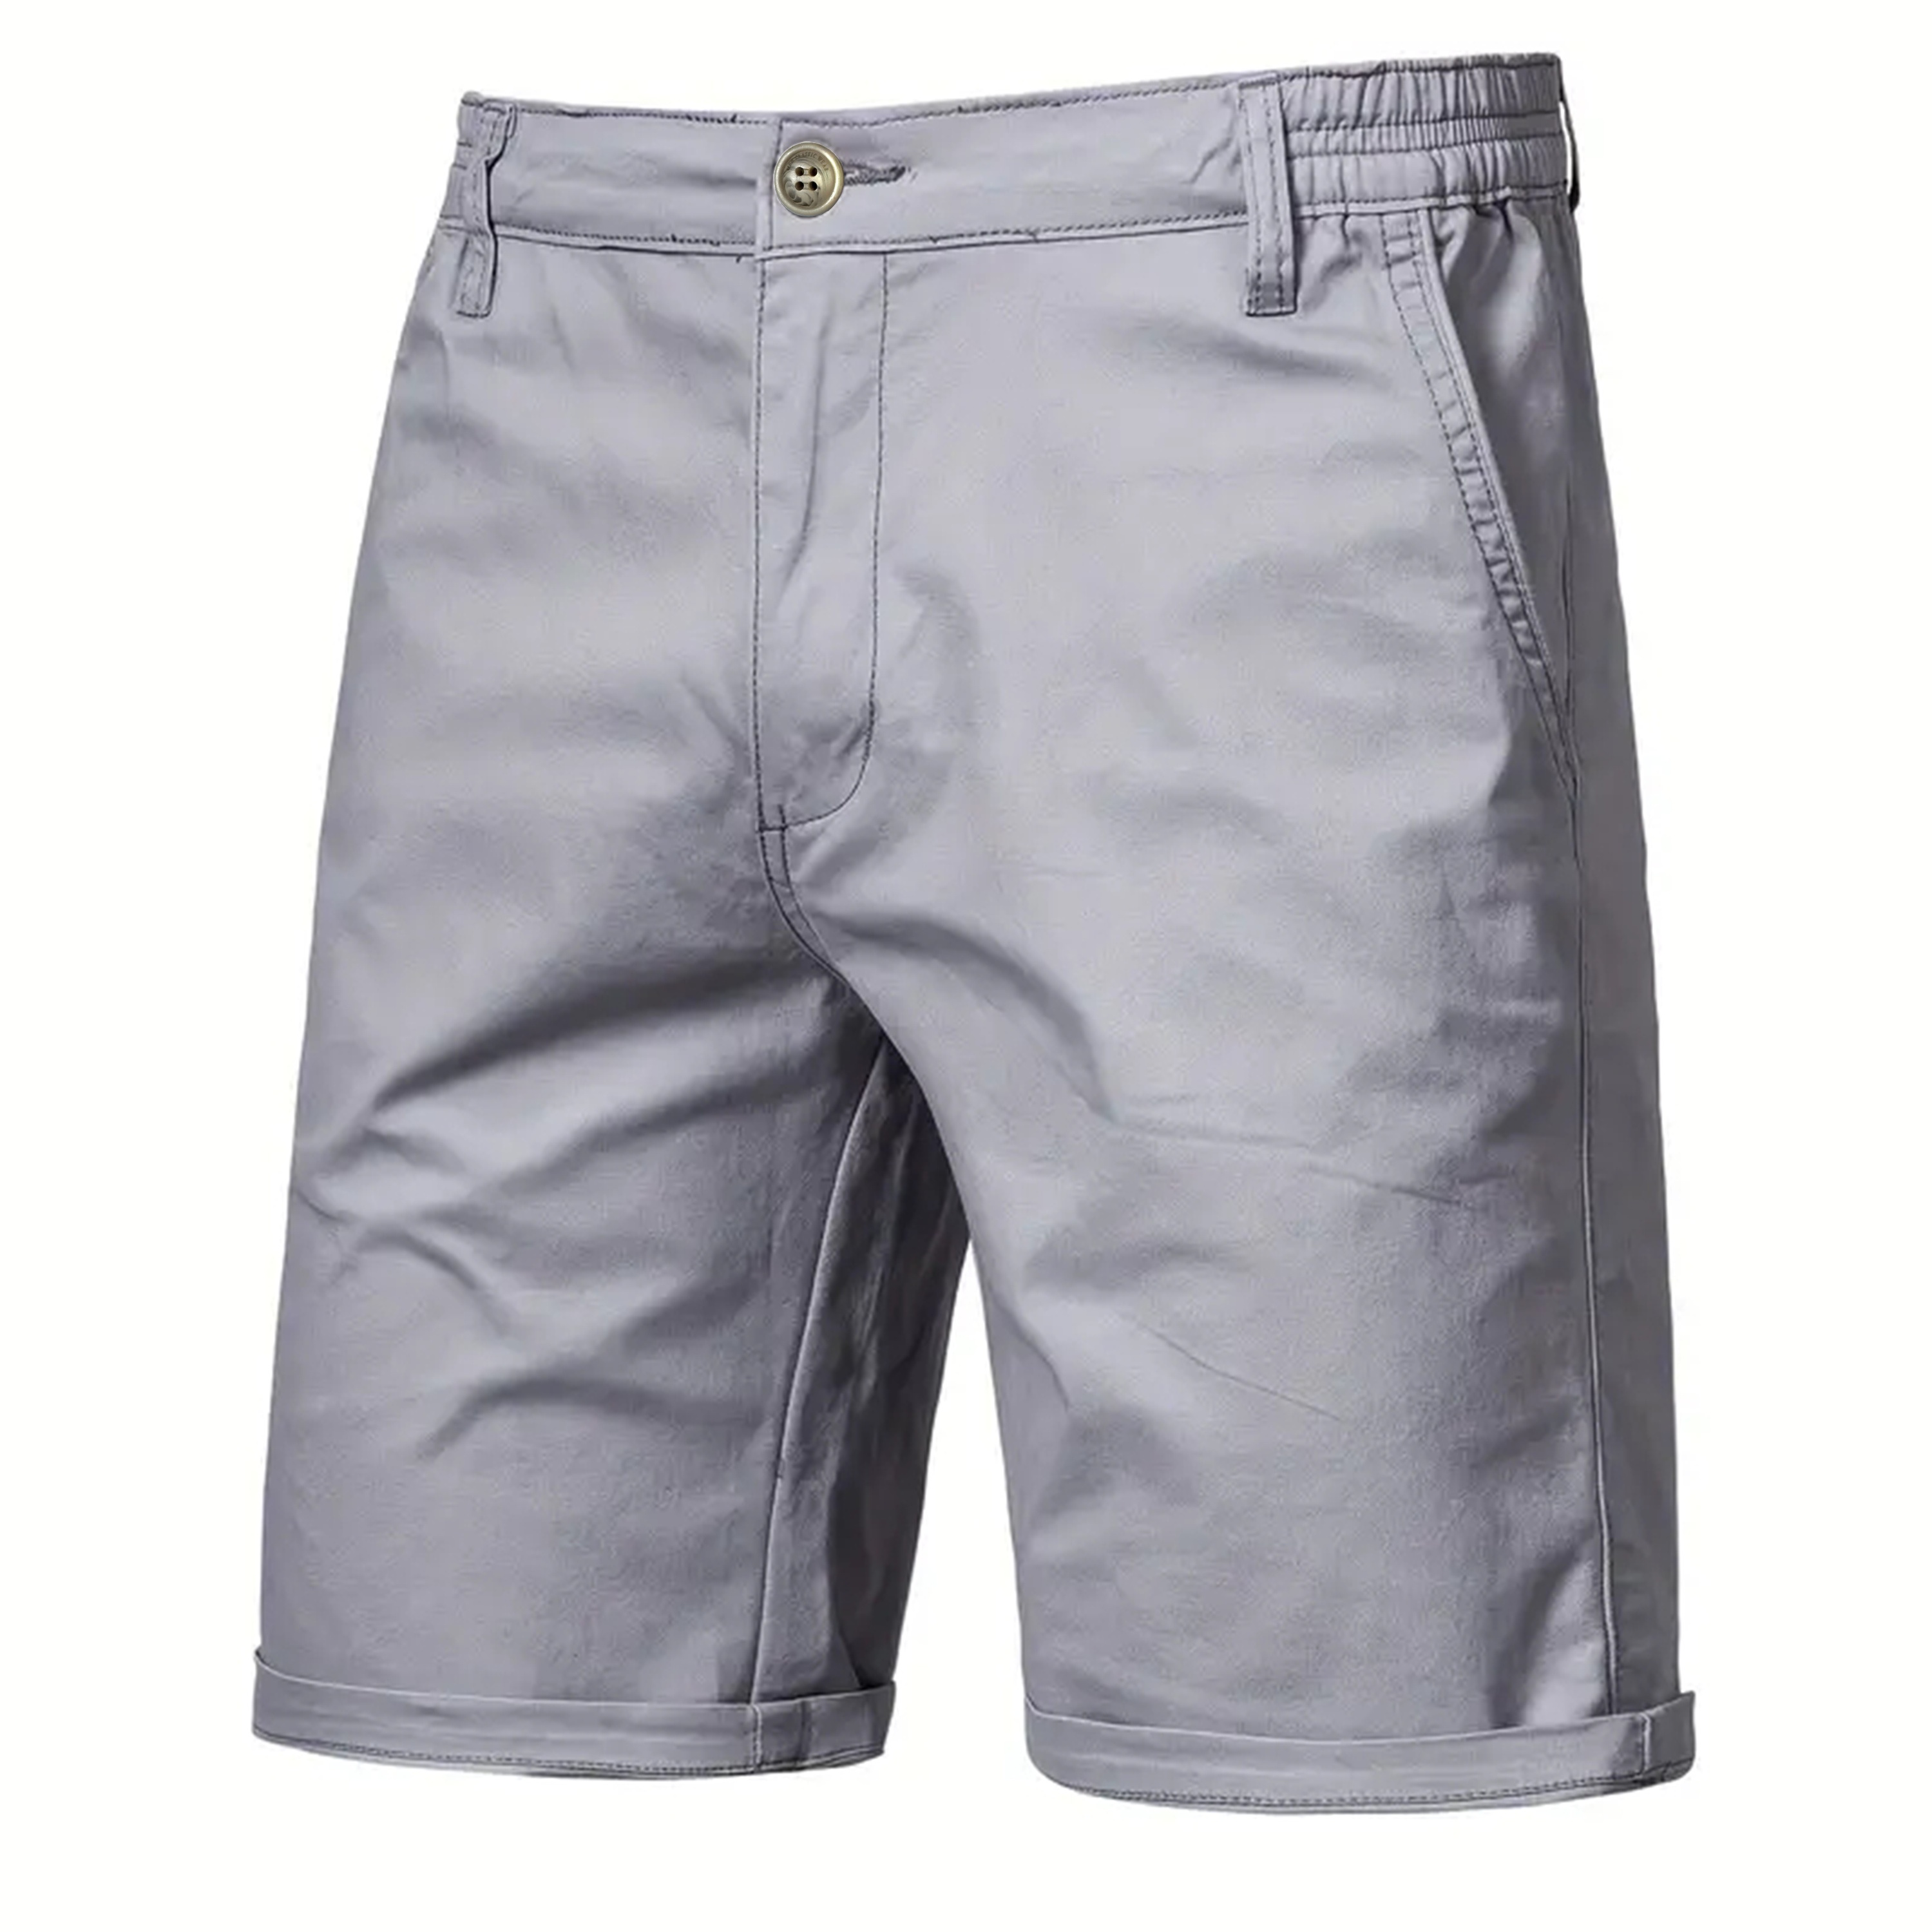 

Solid Color Classic Shorts With Multiple Pockets, Casual And Chic Shorts For Men's Summer Outdoors Wear